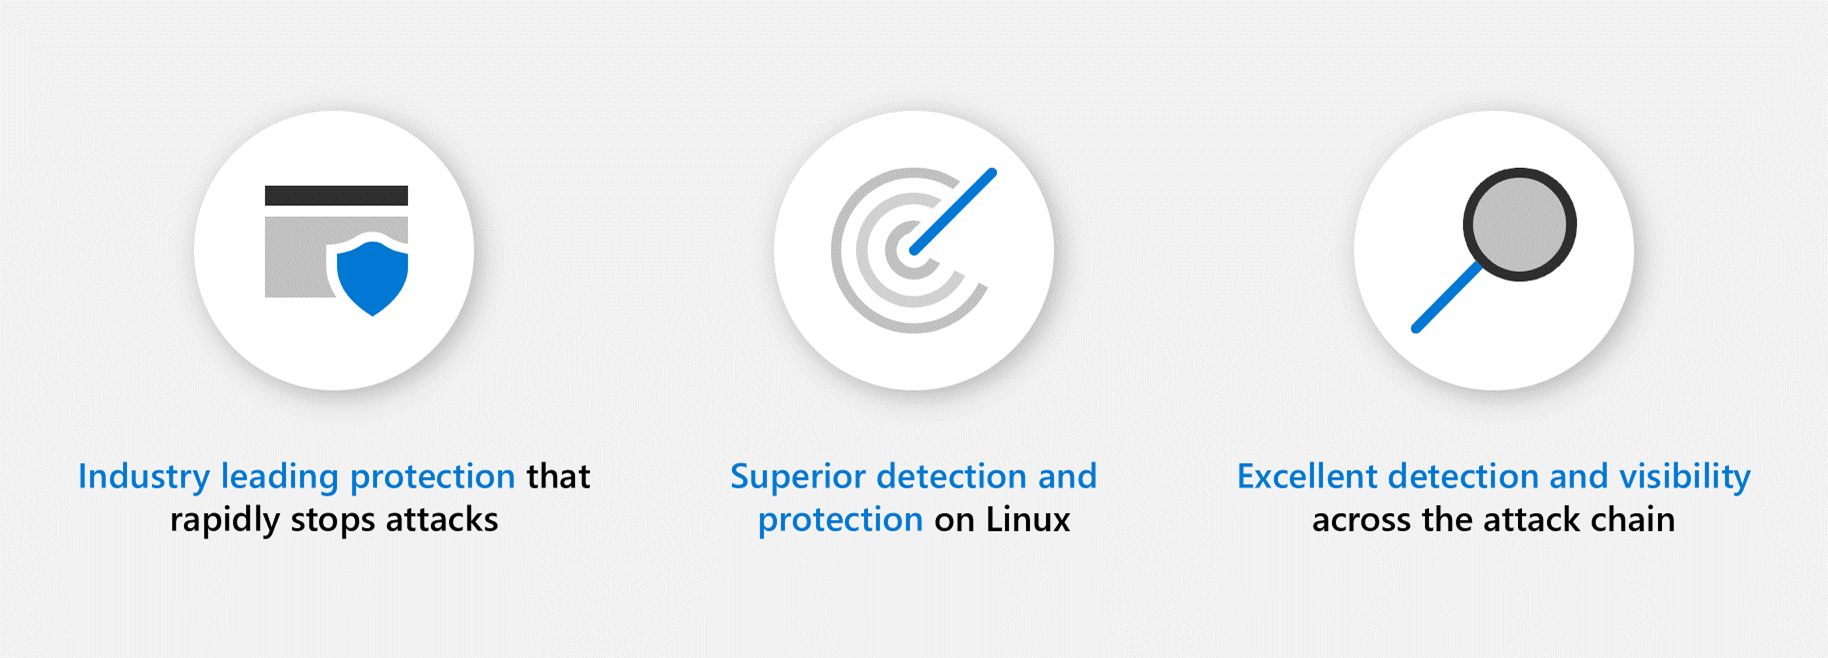 Three circular icon graphics depicting that Microsoft offers industry-leading protection, superior detection and protection on Linux, and excellent detection and visibility across the attach chain.